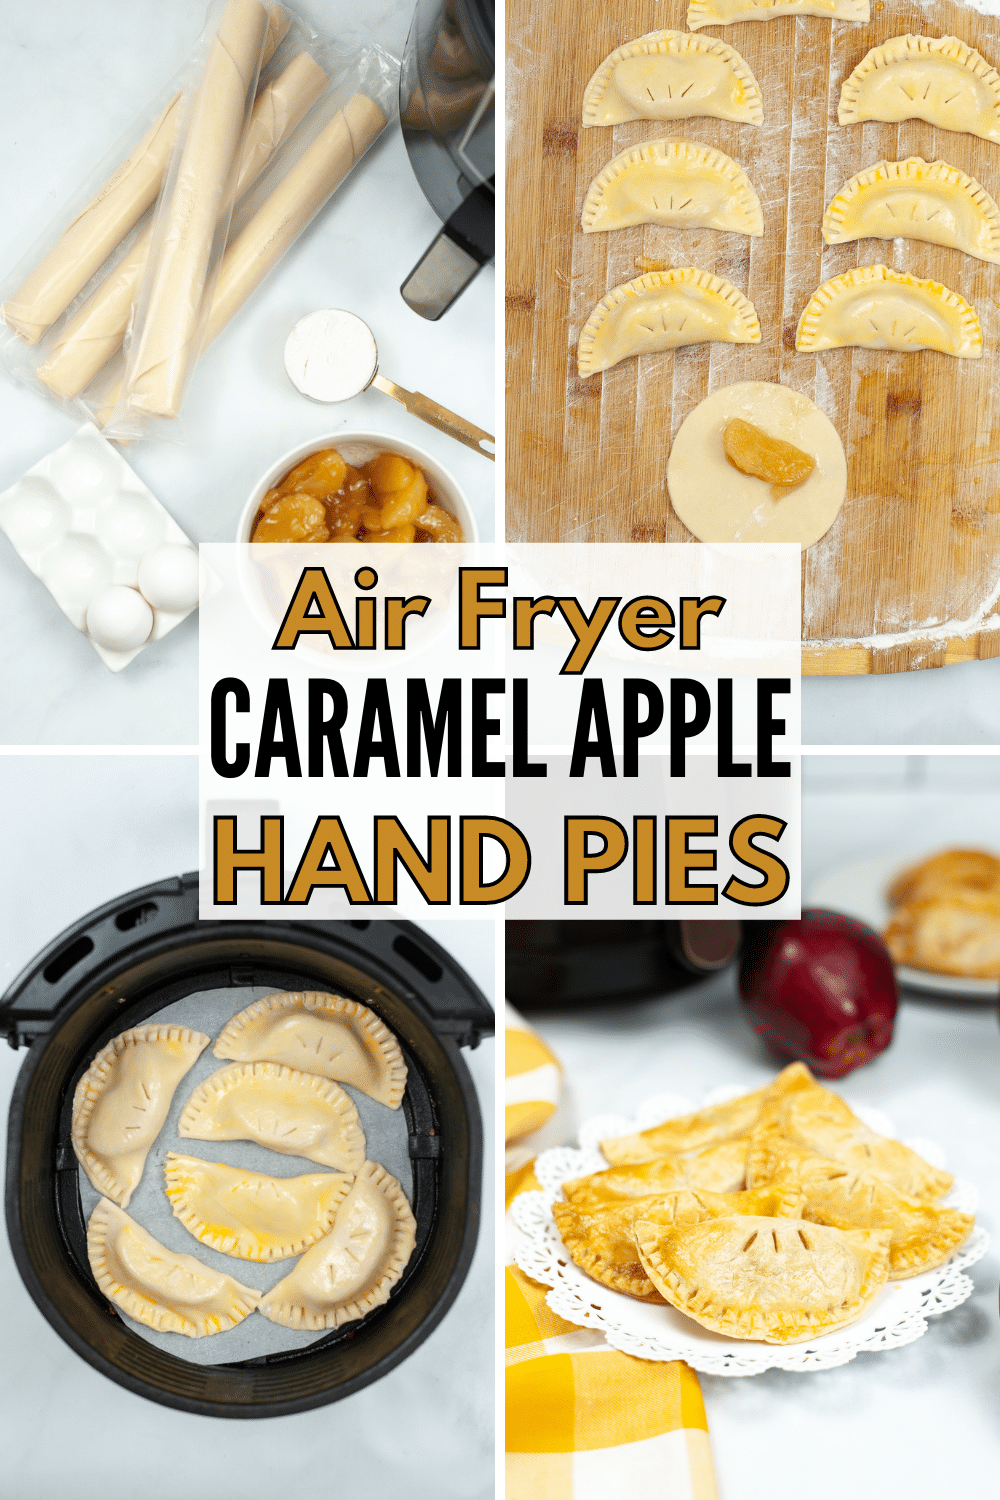 These Air Fryer Caramel Apple Hand Pies are packed with flavor and so delicious! They only take a few minutes to cook in the air fryer. #airfryer #caramelapple #applehandpie #dessert #recipe via @wondermomwannab